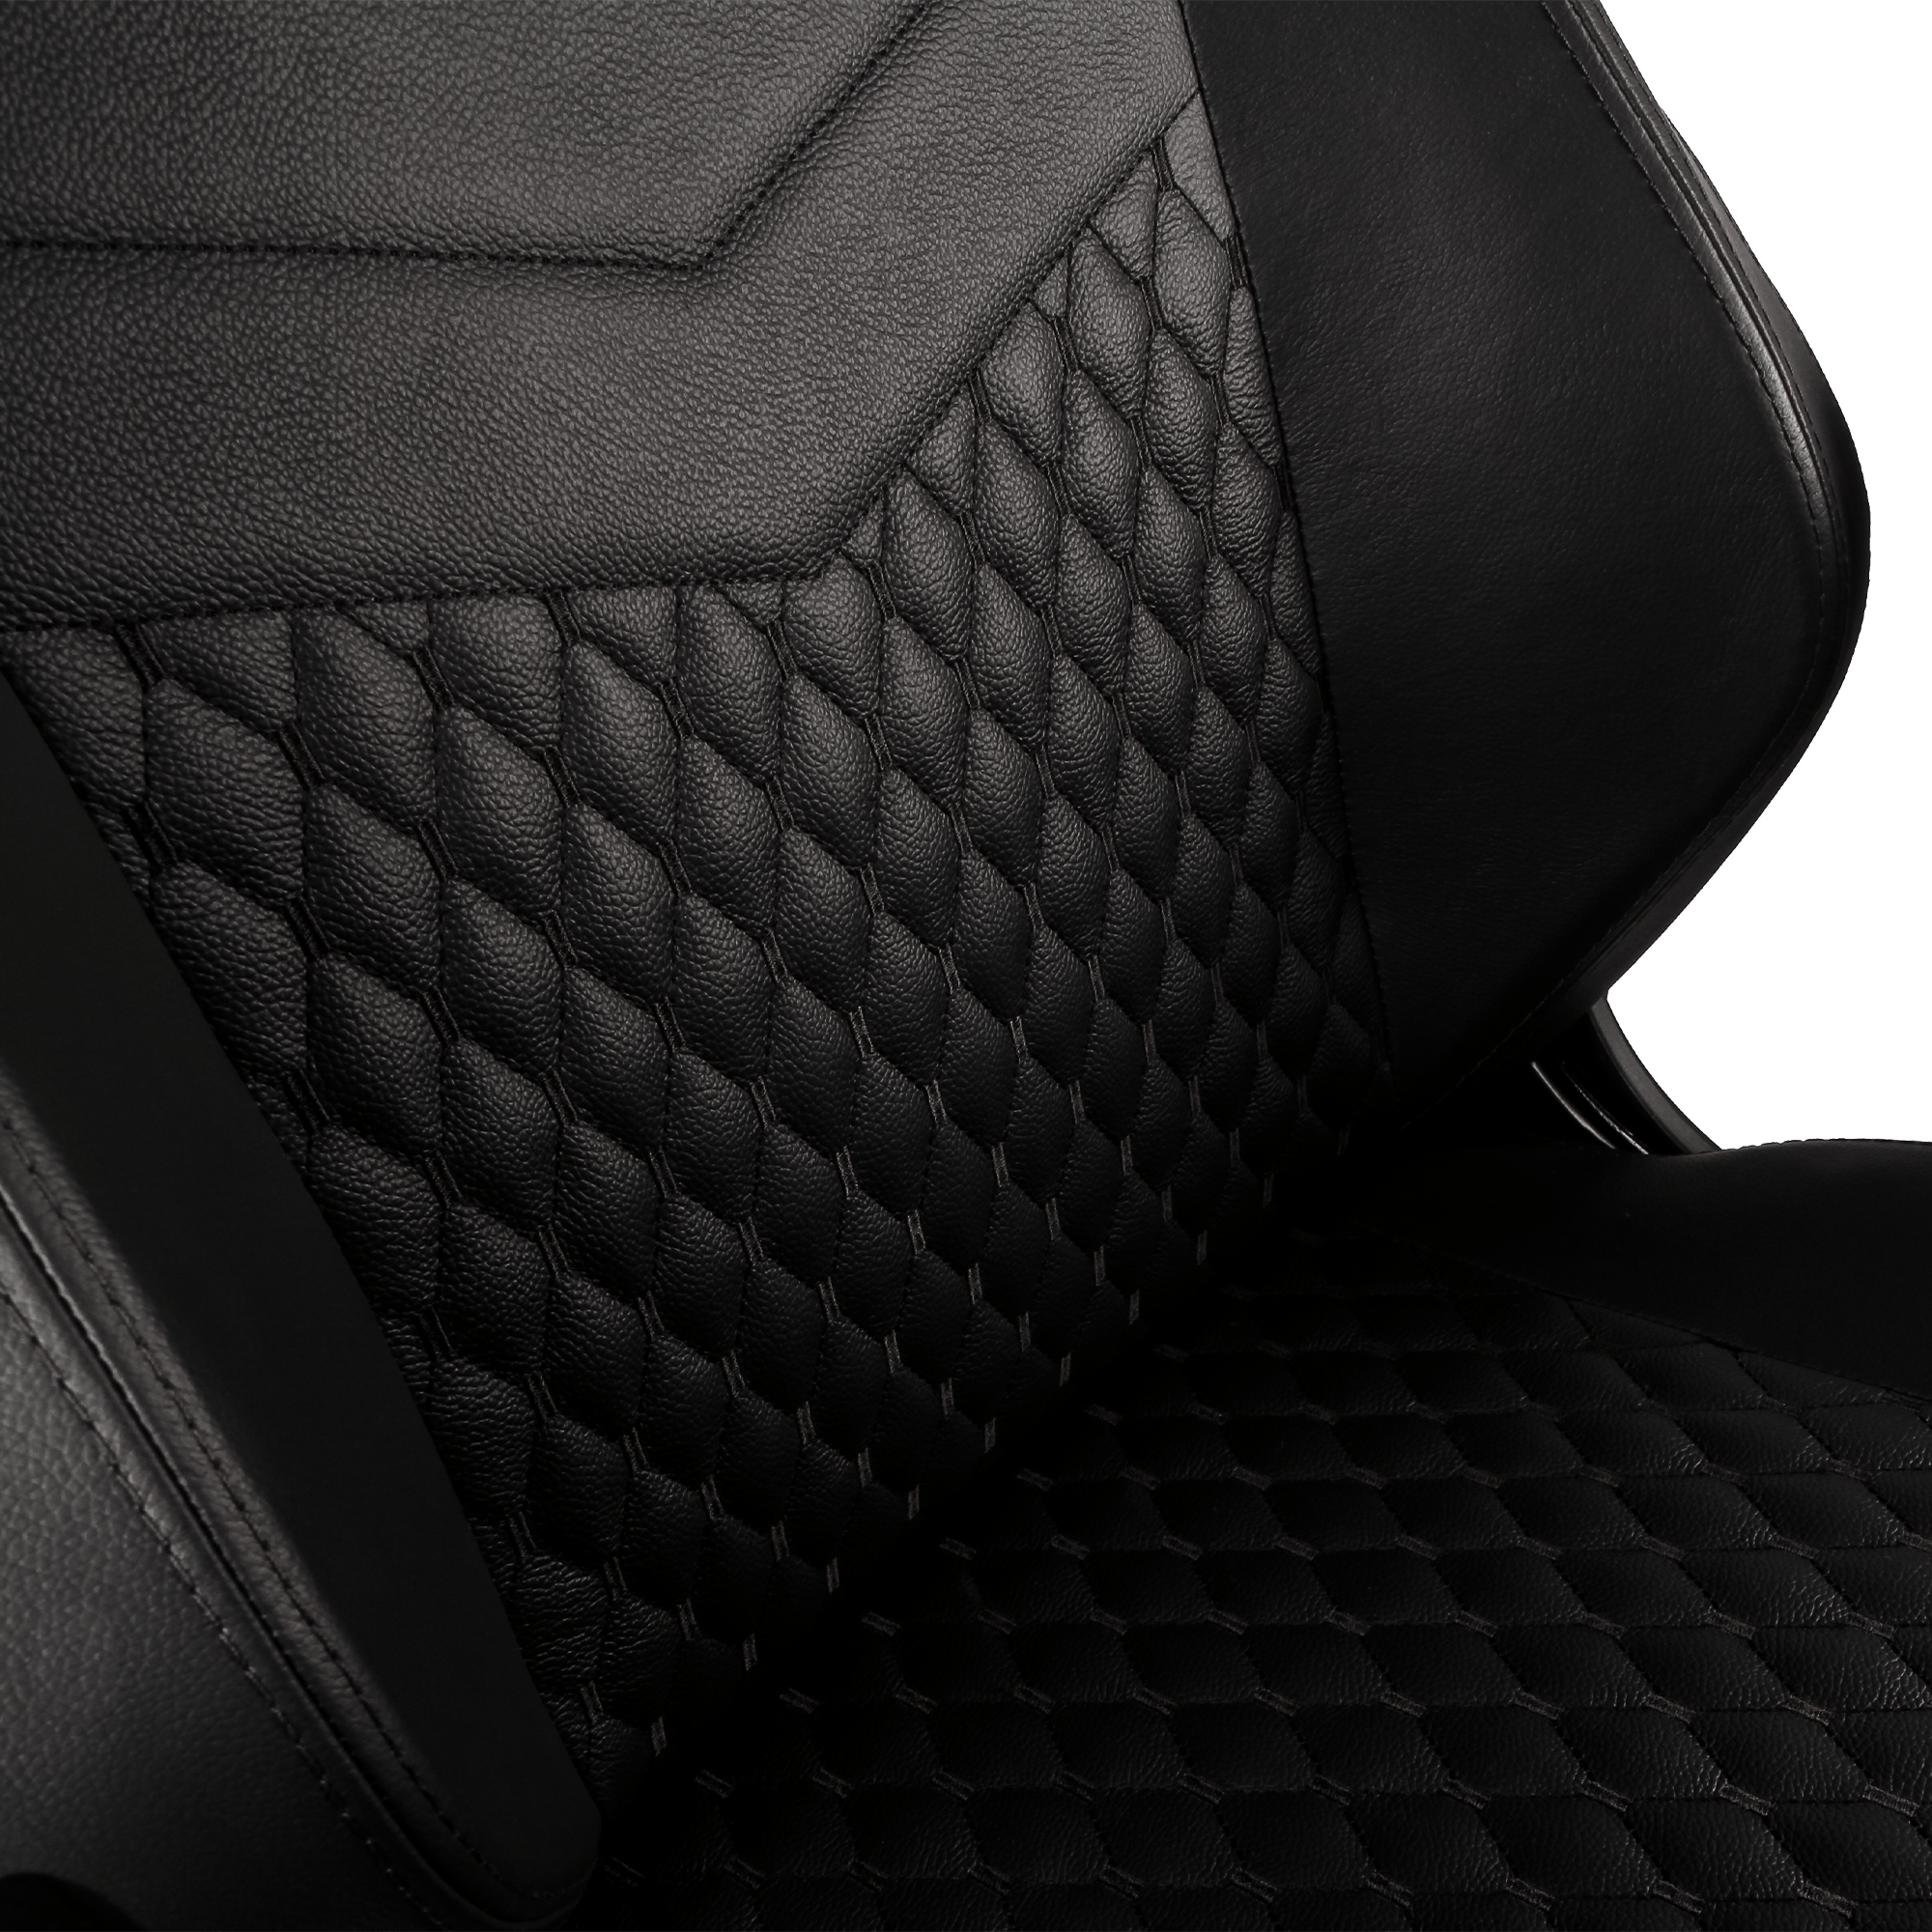 noblechairs - HERO Real Leather musta